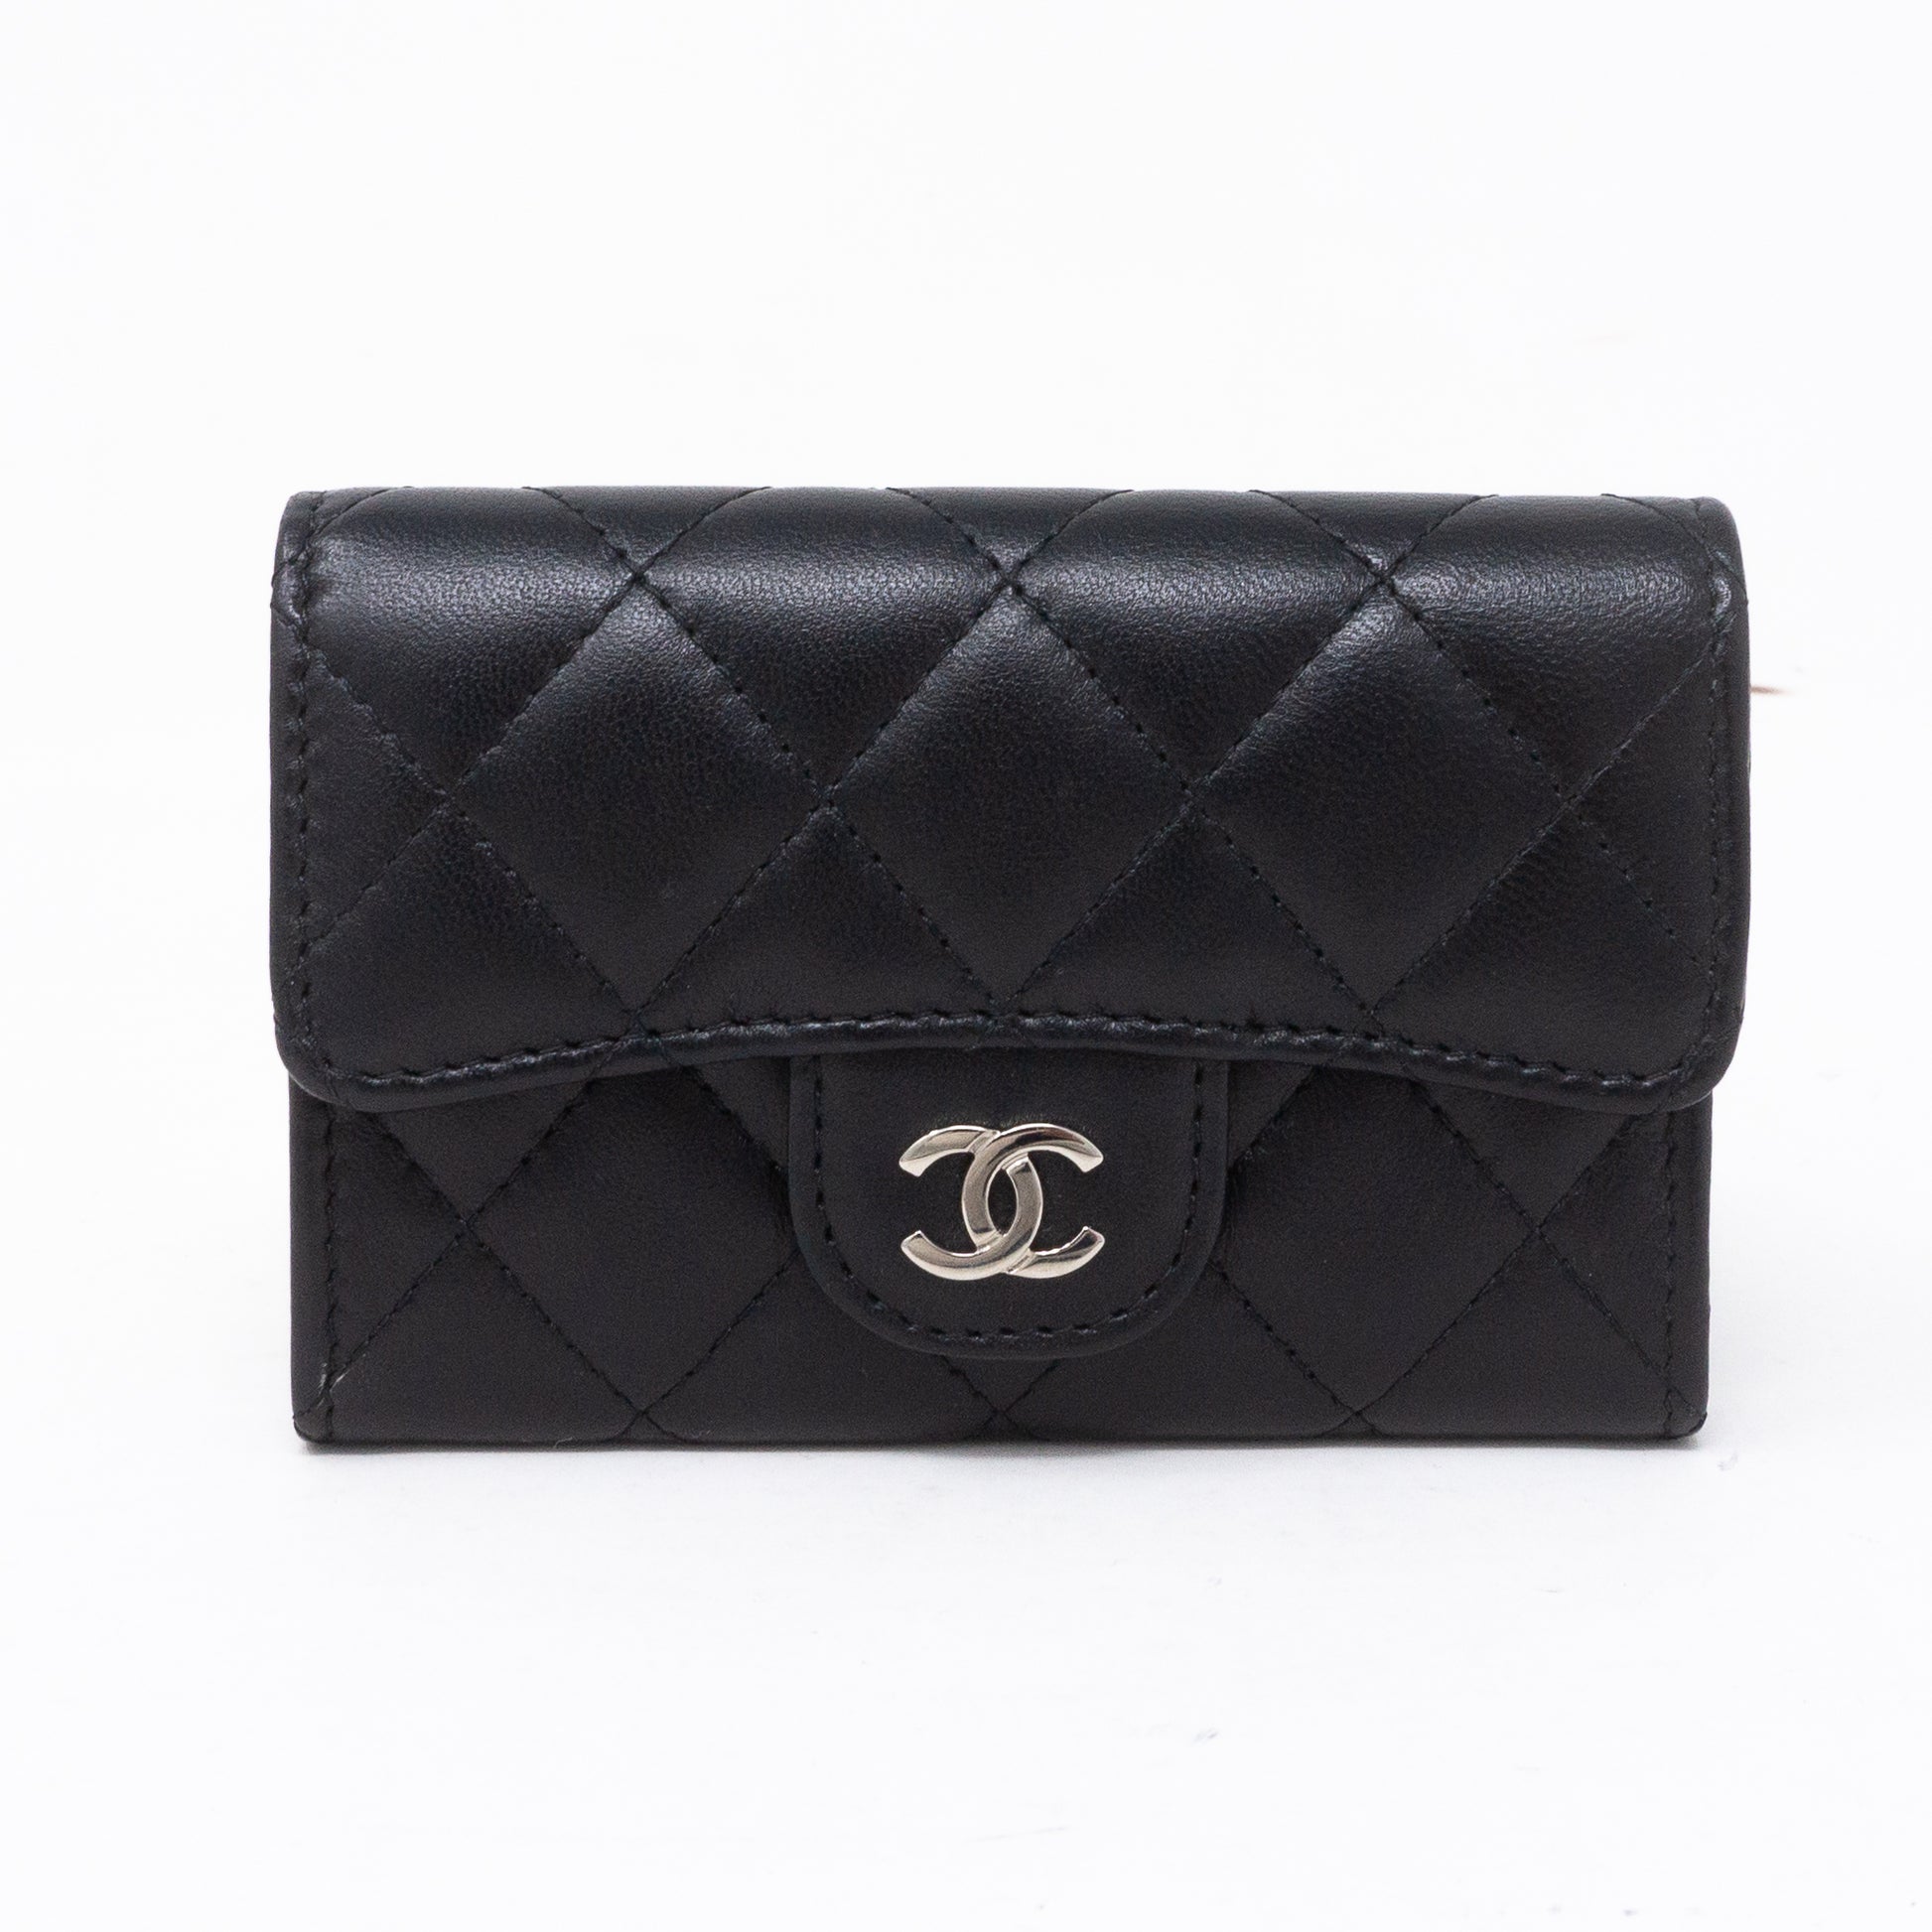 Chanel – Classic Flap Card Case Large Black Lambskin – Queen Station